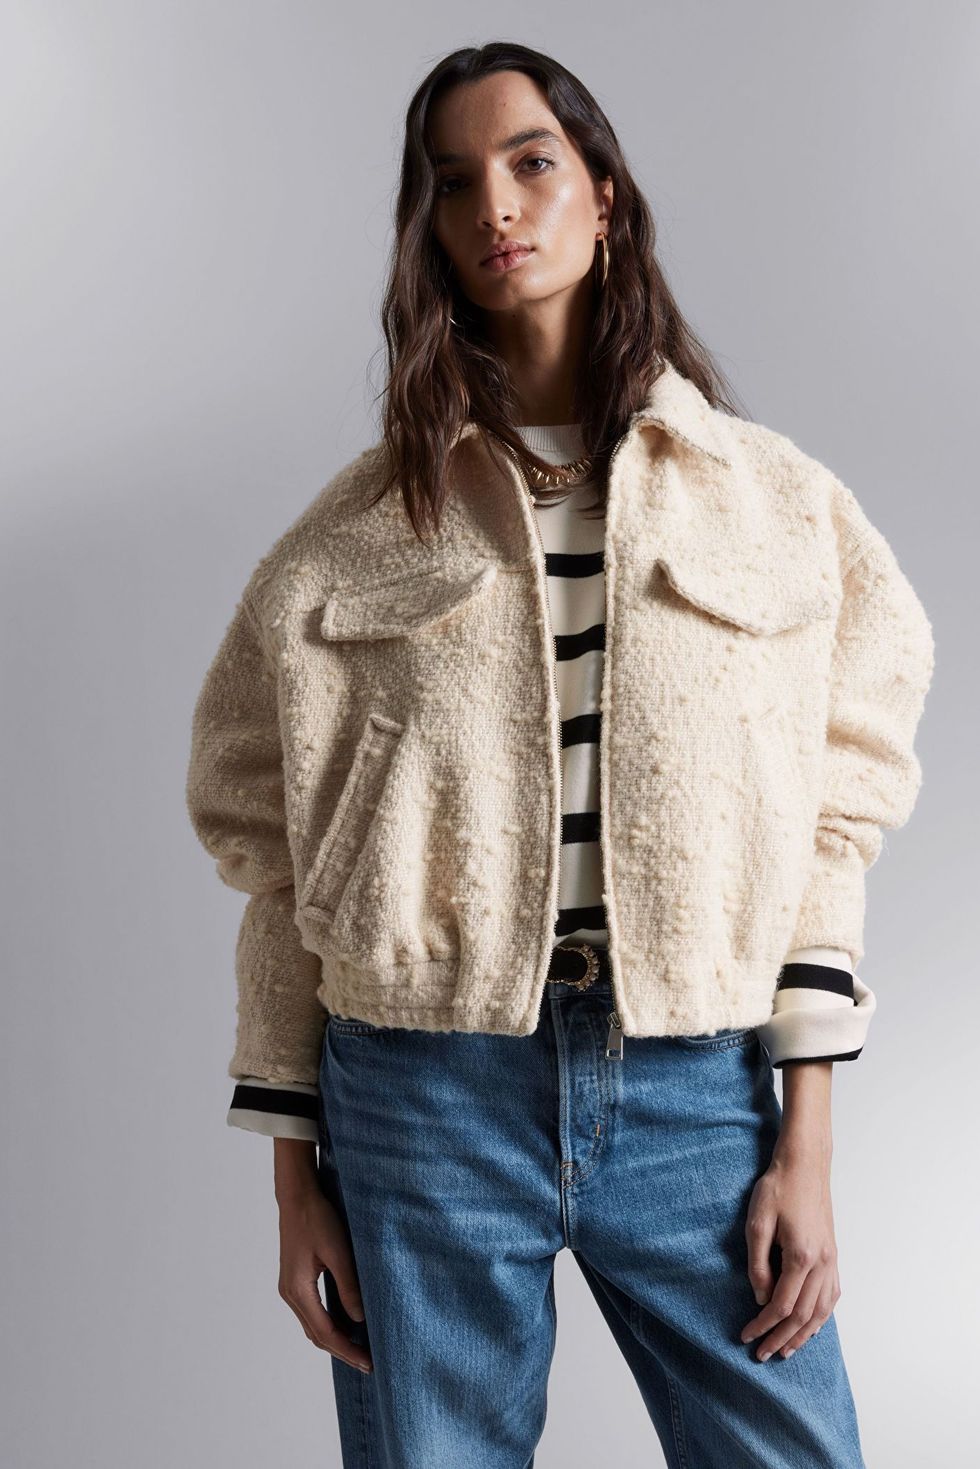 21 best bomber jackets for women to buy for on-trend spring style